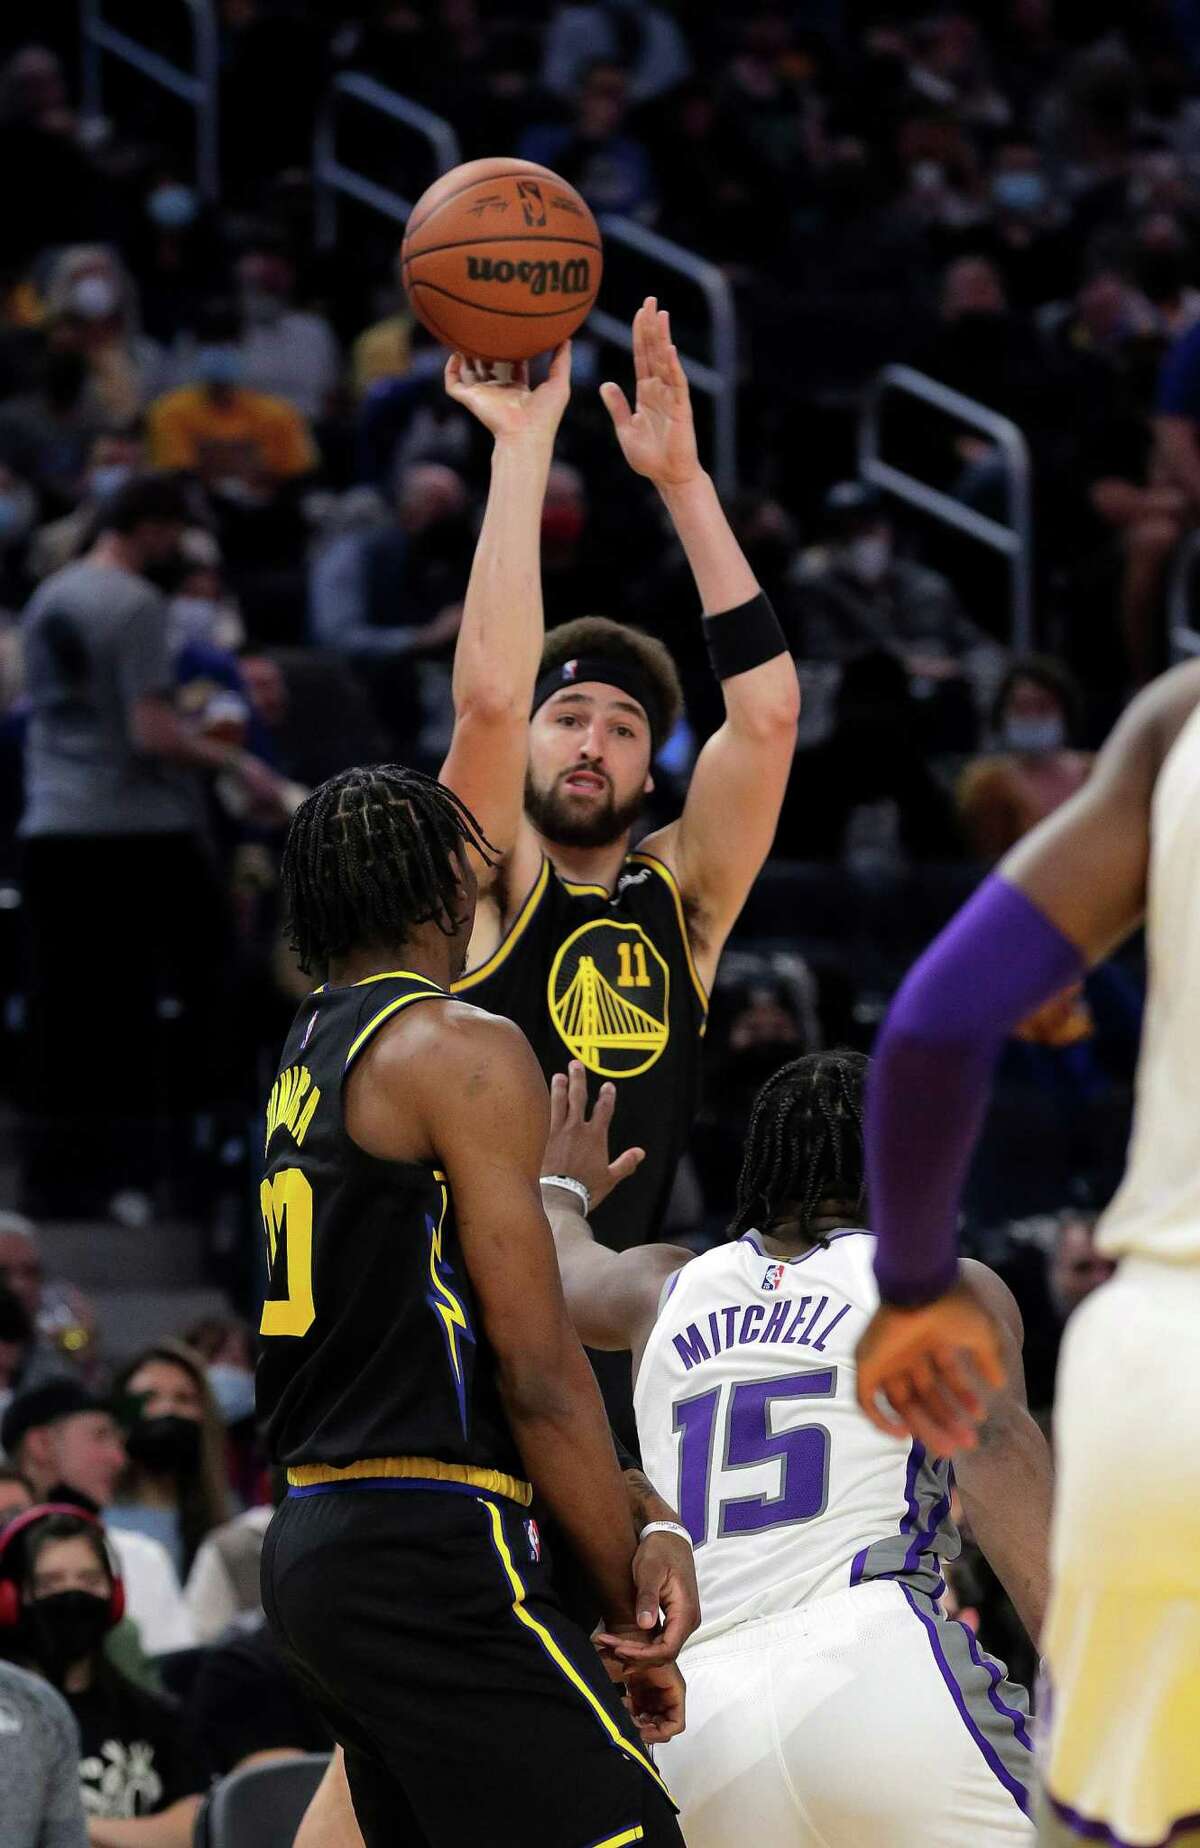 Klay Thompson (11) shoots a three pointer in the first half as the Golden State Warriors played the Sacramento Kings at Chase Center in San Francisco, Calif., on Thursday, February 3, 2022.